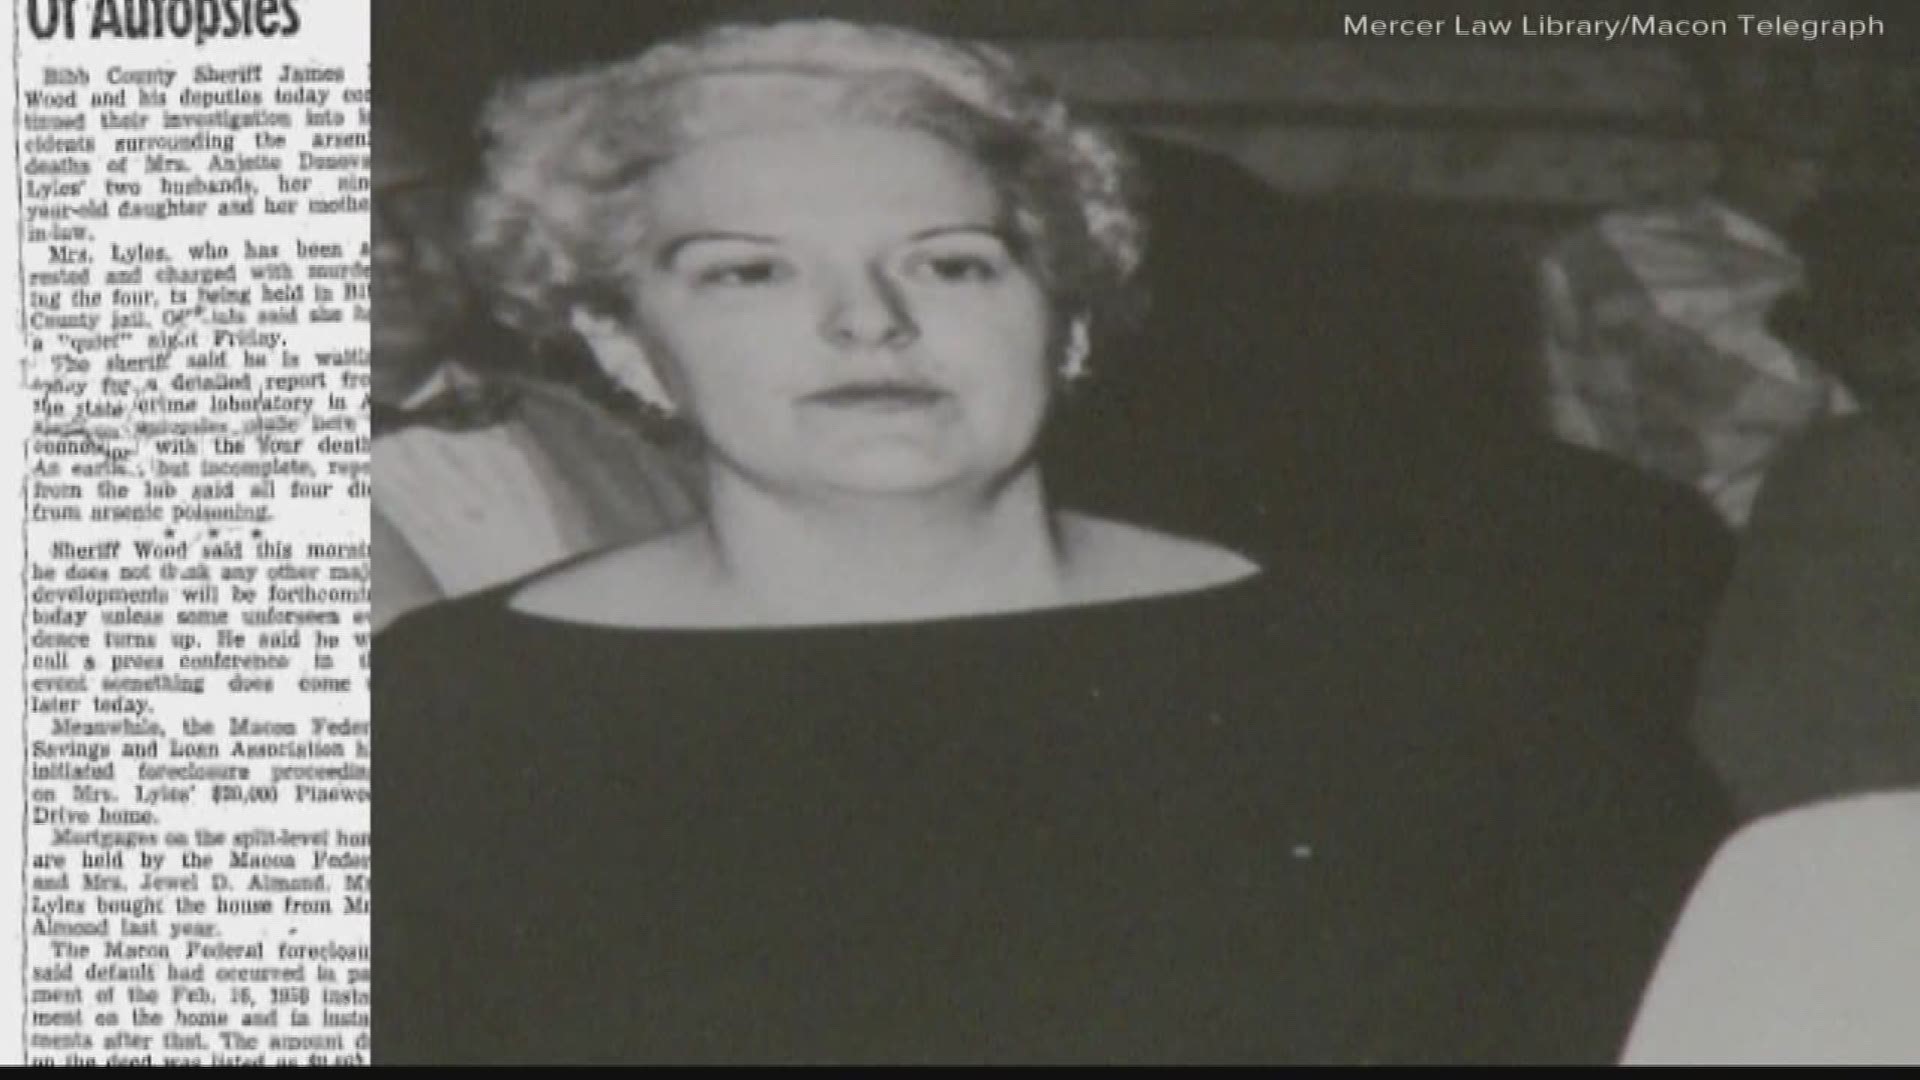 61 years ago, a Bibb County jury convicted Anjette Lyles of poisoning her 9-year-old daughter.